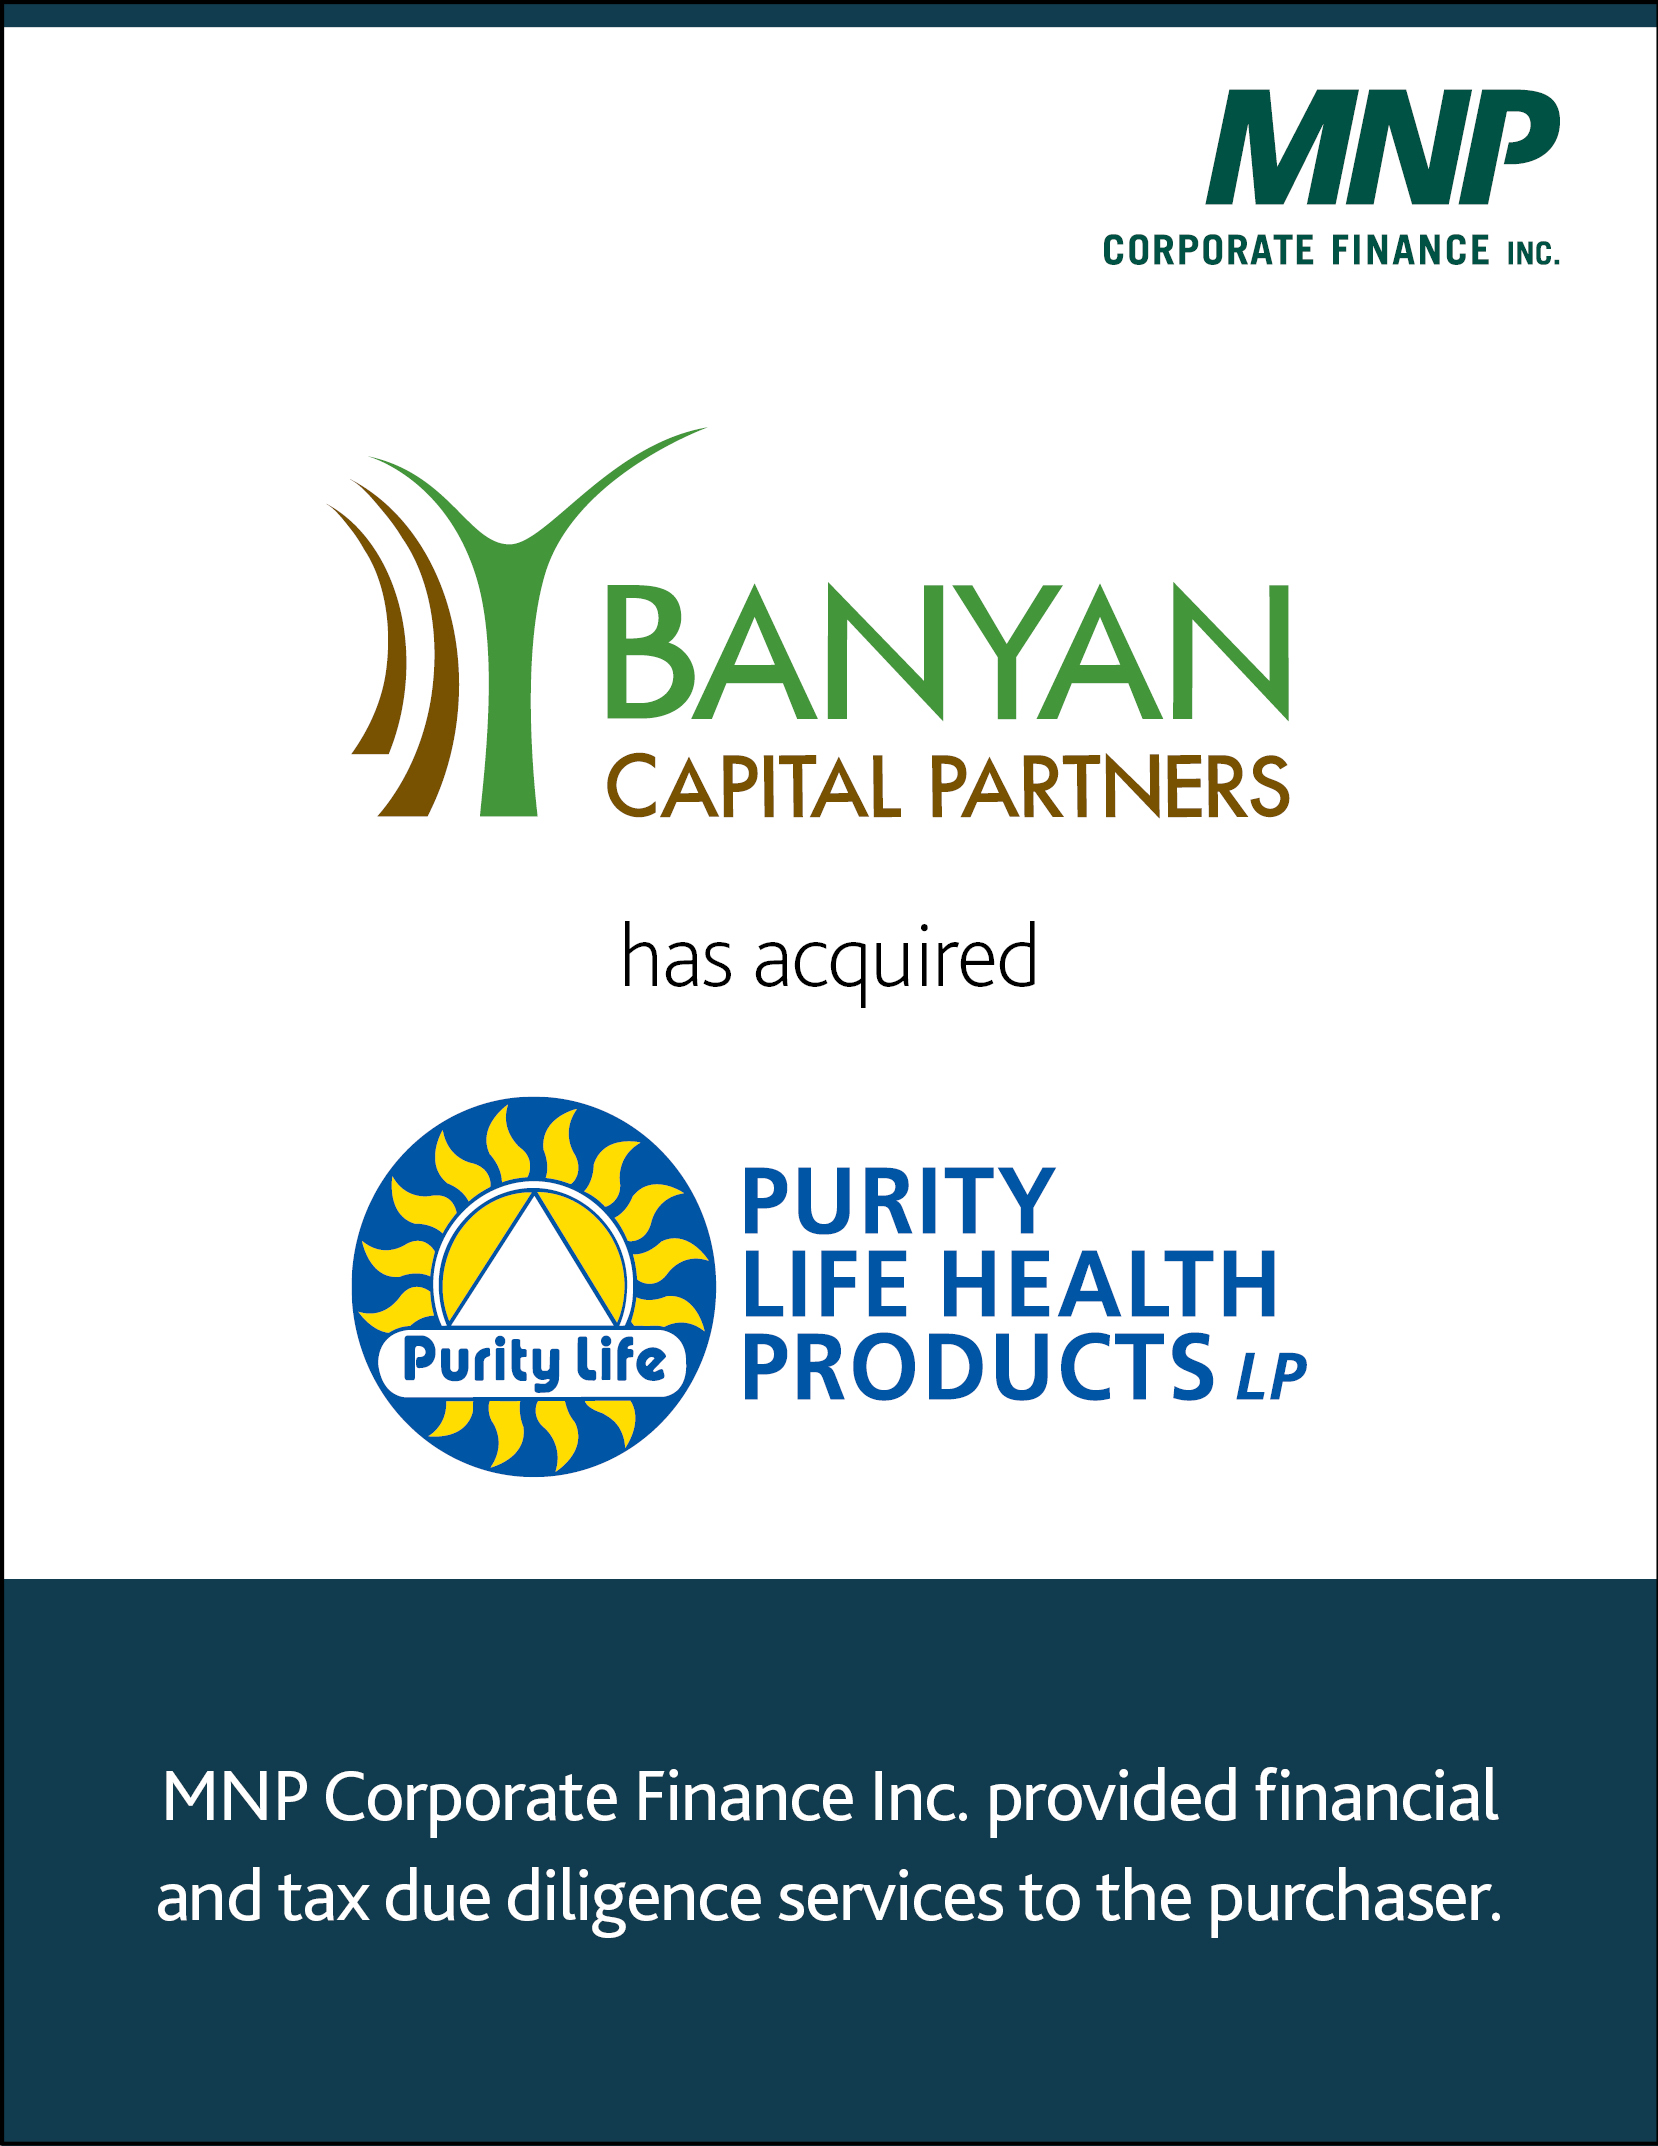 Banyan Capital Partners has Acquired Purity Life Health Products LP 